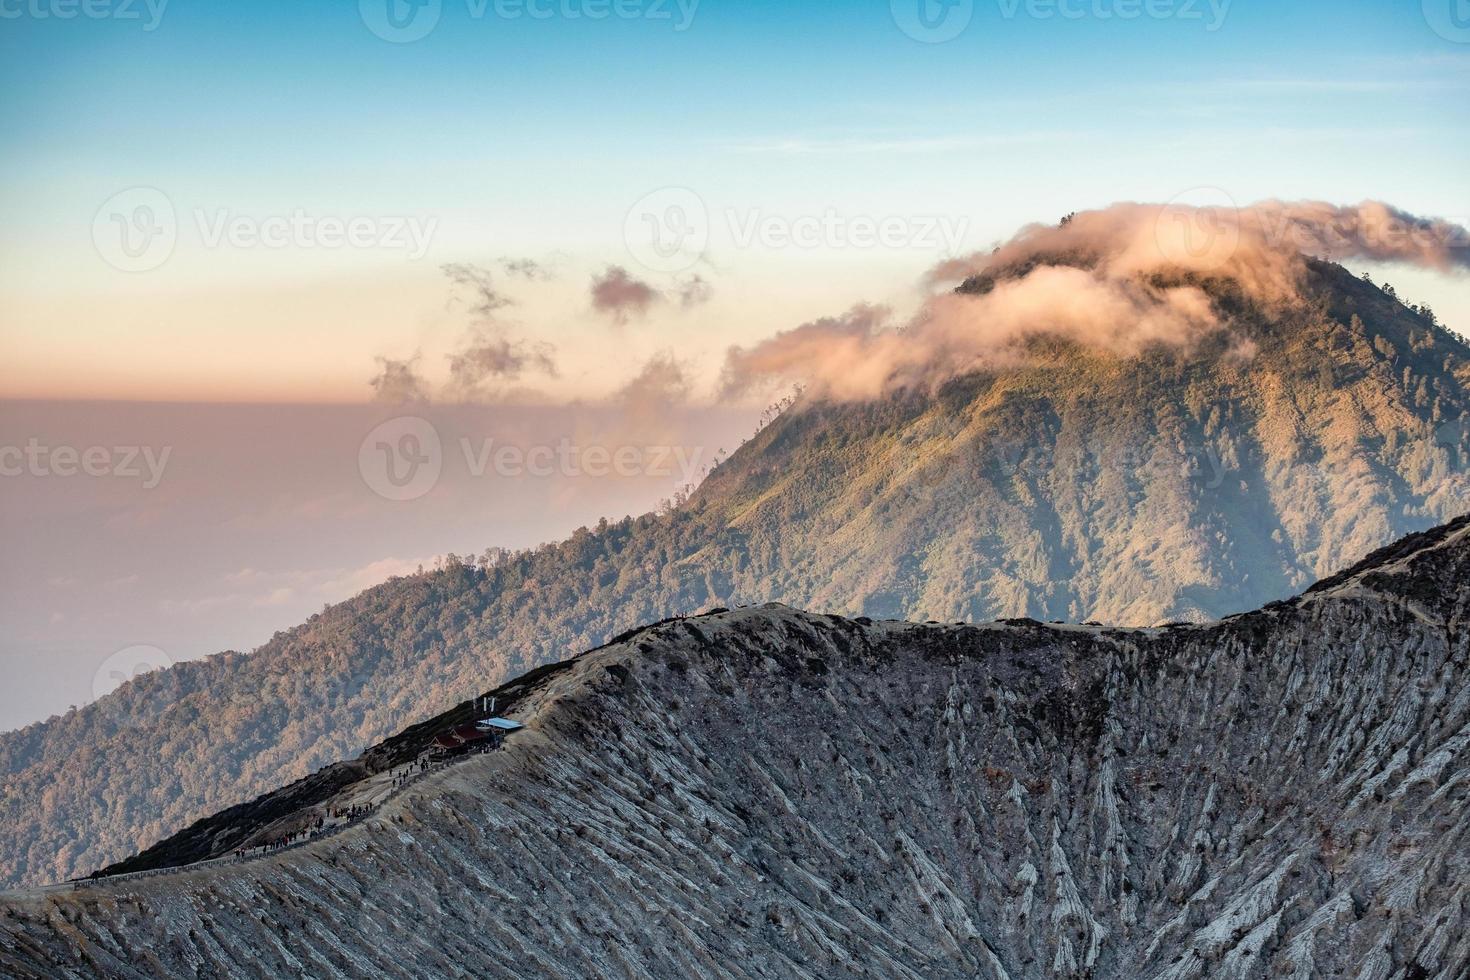 Cloud on mountain with crater textured on Kawah Ijen photo